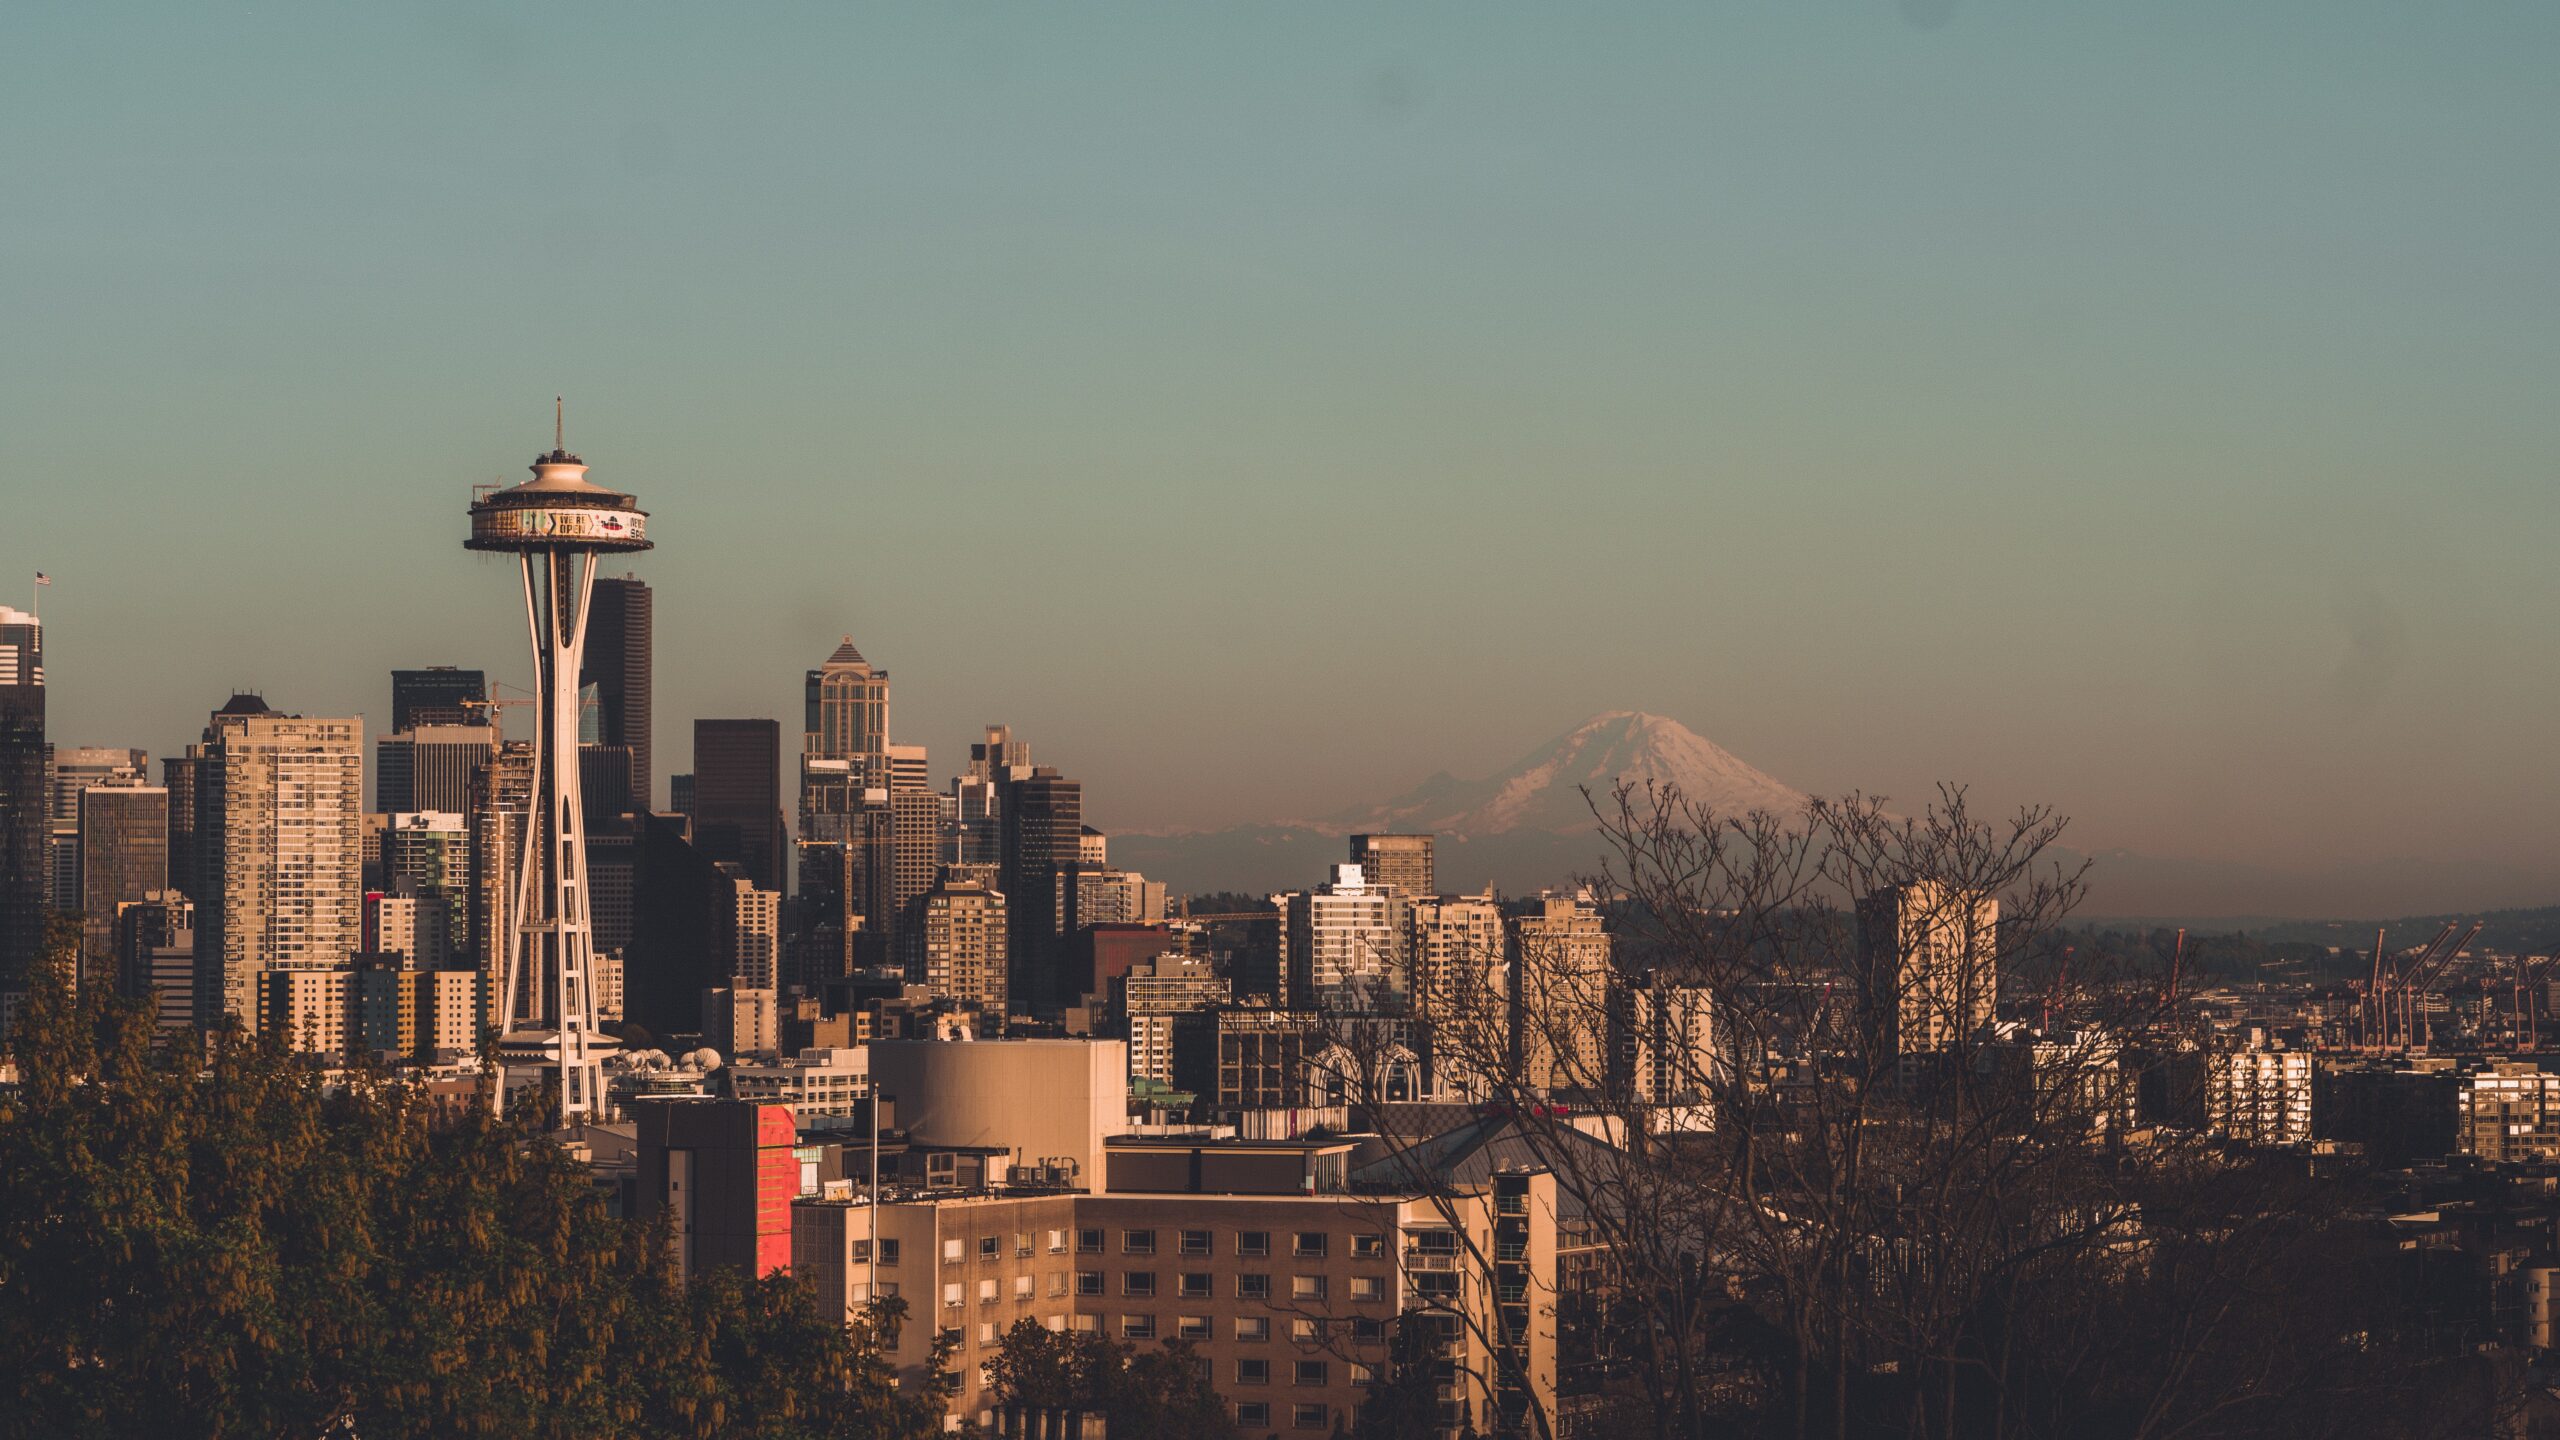 Seattle skyline with space needle.